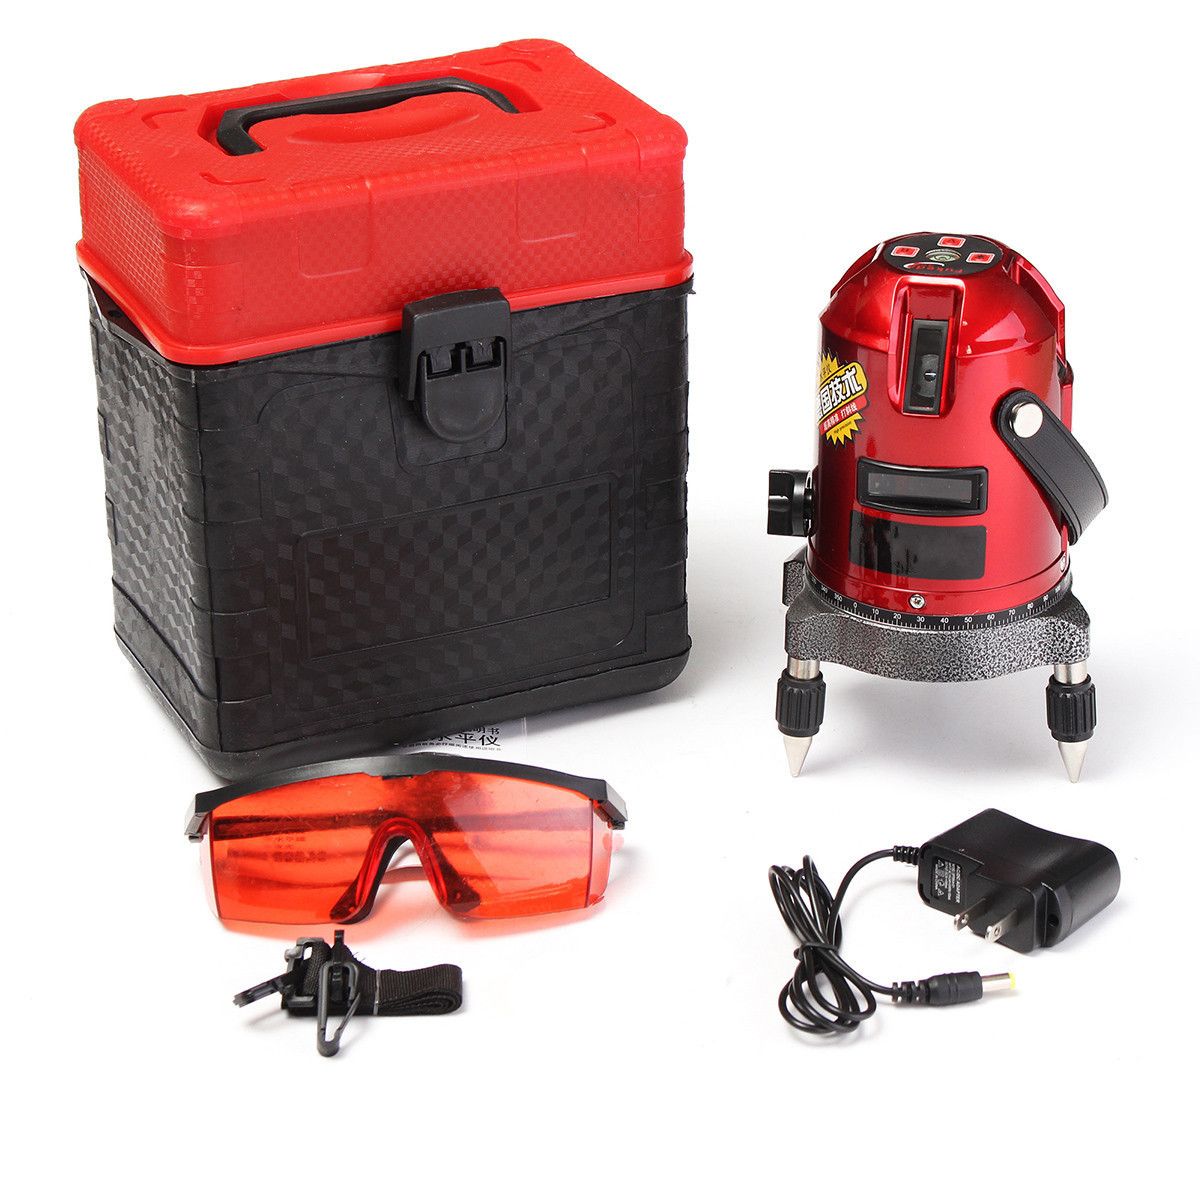 Waterproof-5-Lines-6-Points-Laser-Level-Red-Automatic-Self-Leveling-Level-Measure-Tool-Outdoor-Mode-1140096